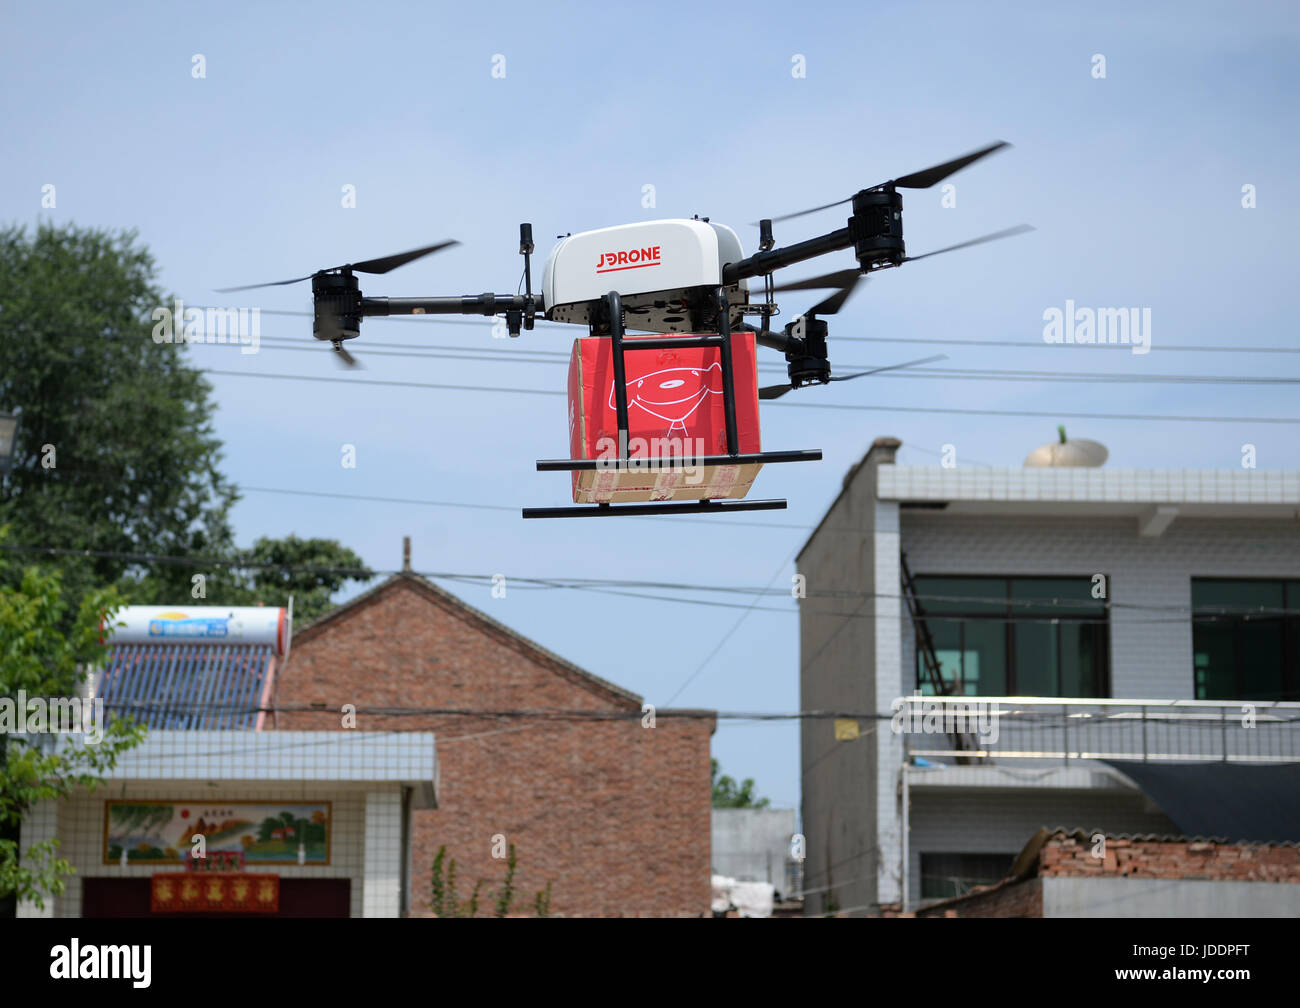 170620) -- XI'AN, June 20, 2017 (Xinhua) -- A drone carrying a package  arrives at a goods delivery landing site in Xi'an, capital of northwest  China's Shaanxi Province, June 20, 2017. Delivering